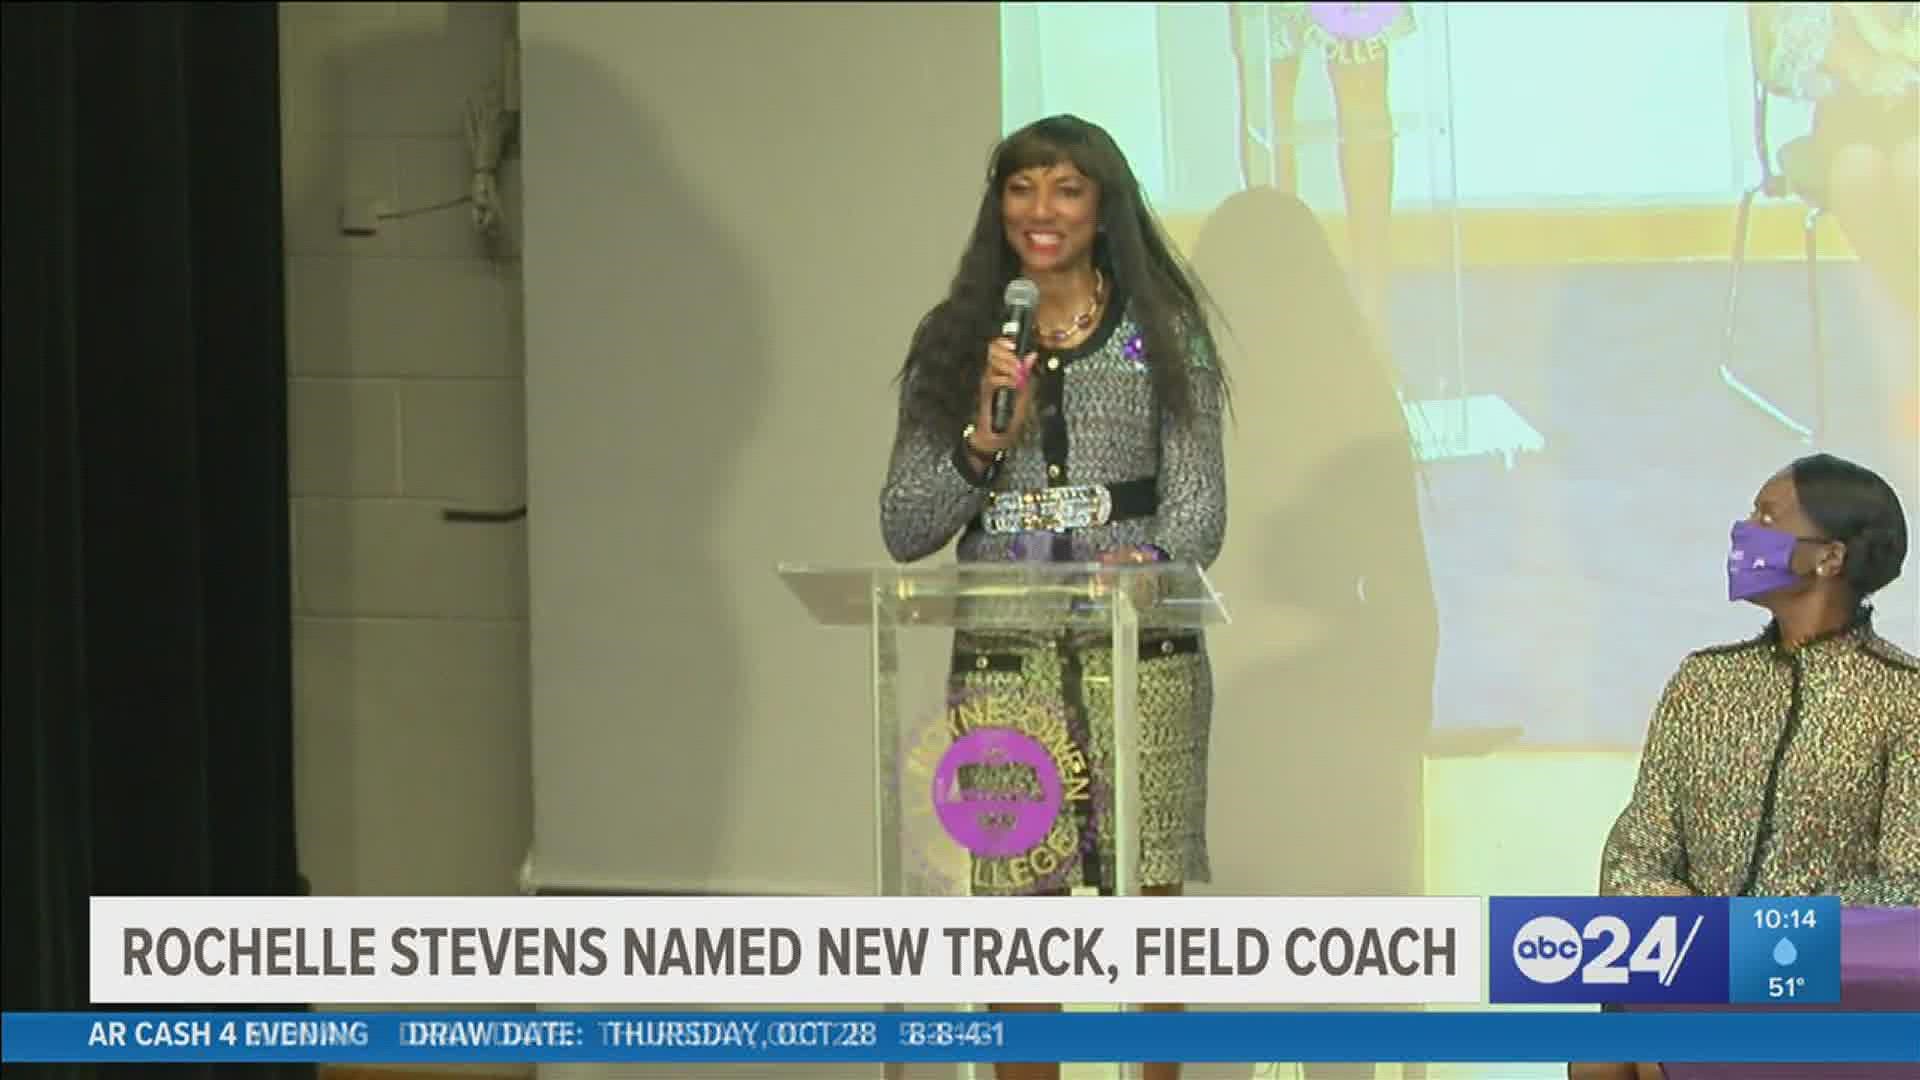 Rochelle Stevens, a Memphis native and Ph.D., is a two-time Olympic medalist, winning silver in 1992 and gold for the 4x400 meter in 1996.